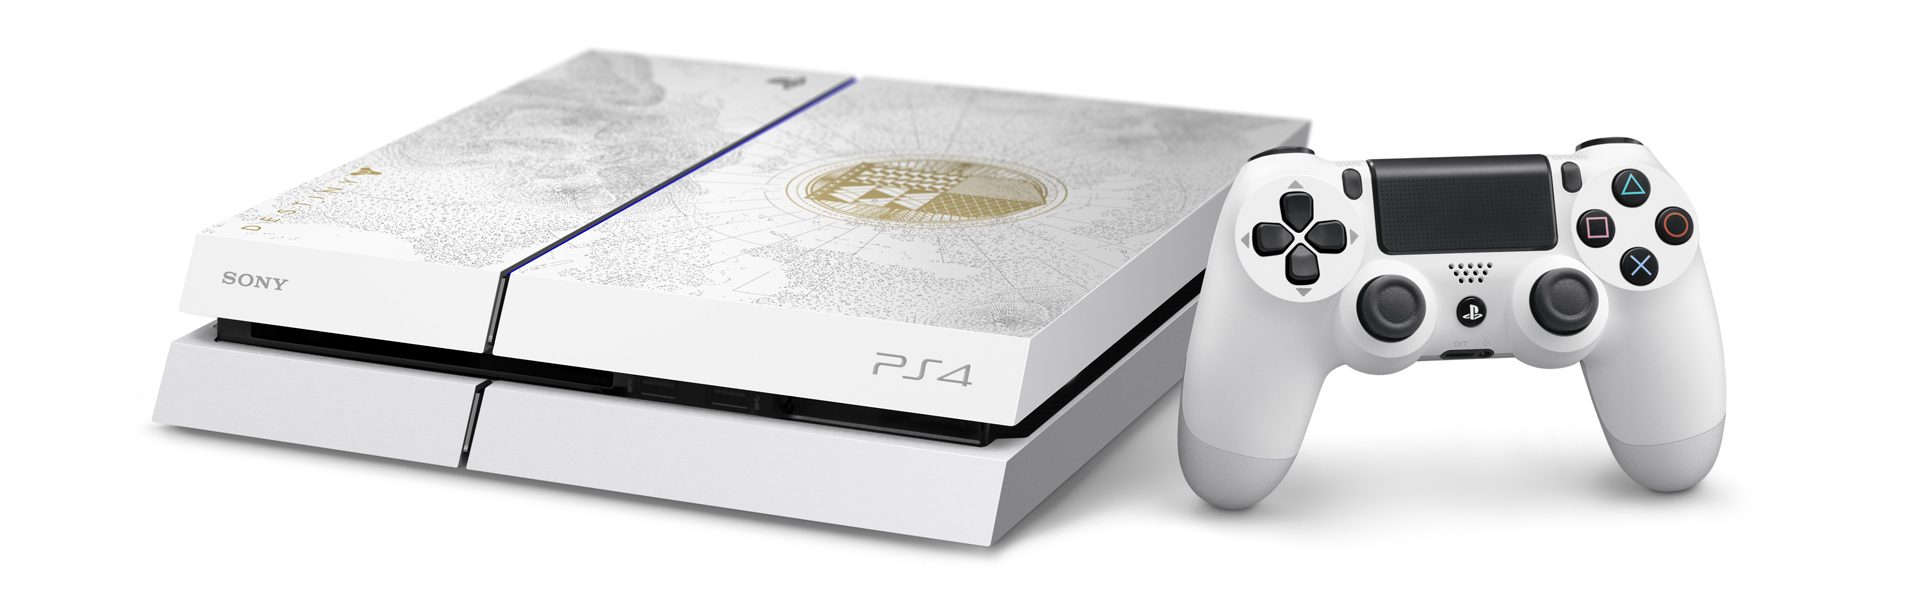 ps4 limited edition destiny